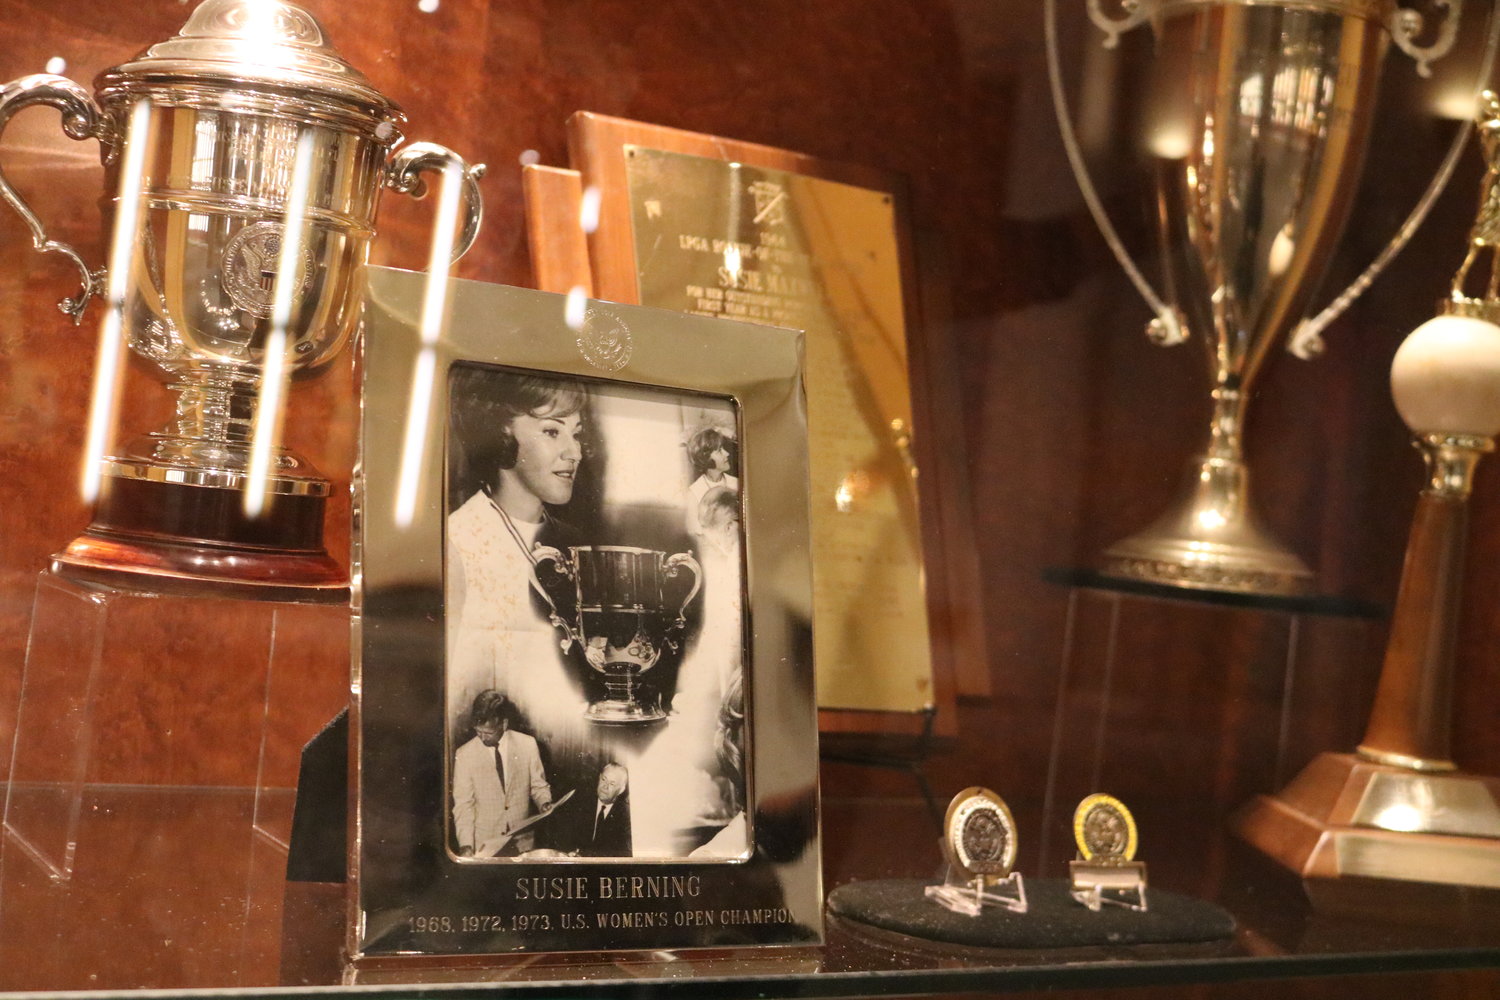 Susie Maxwell Berning was a three-time U.S. Women's Open champion during her career.